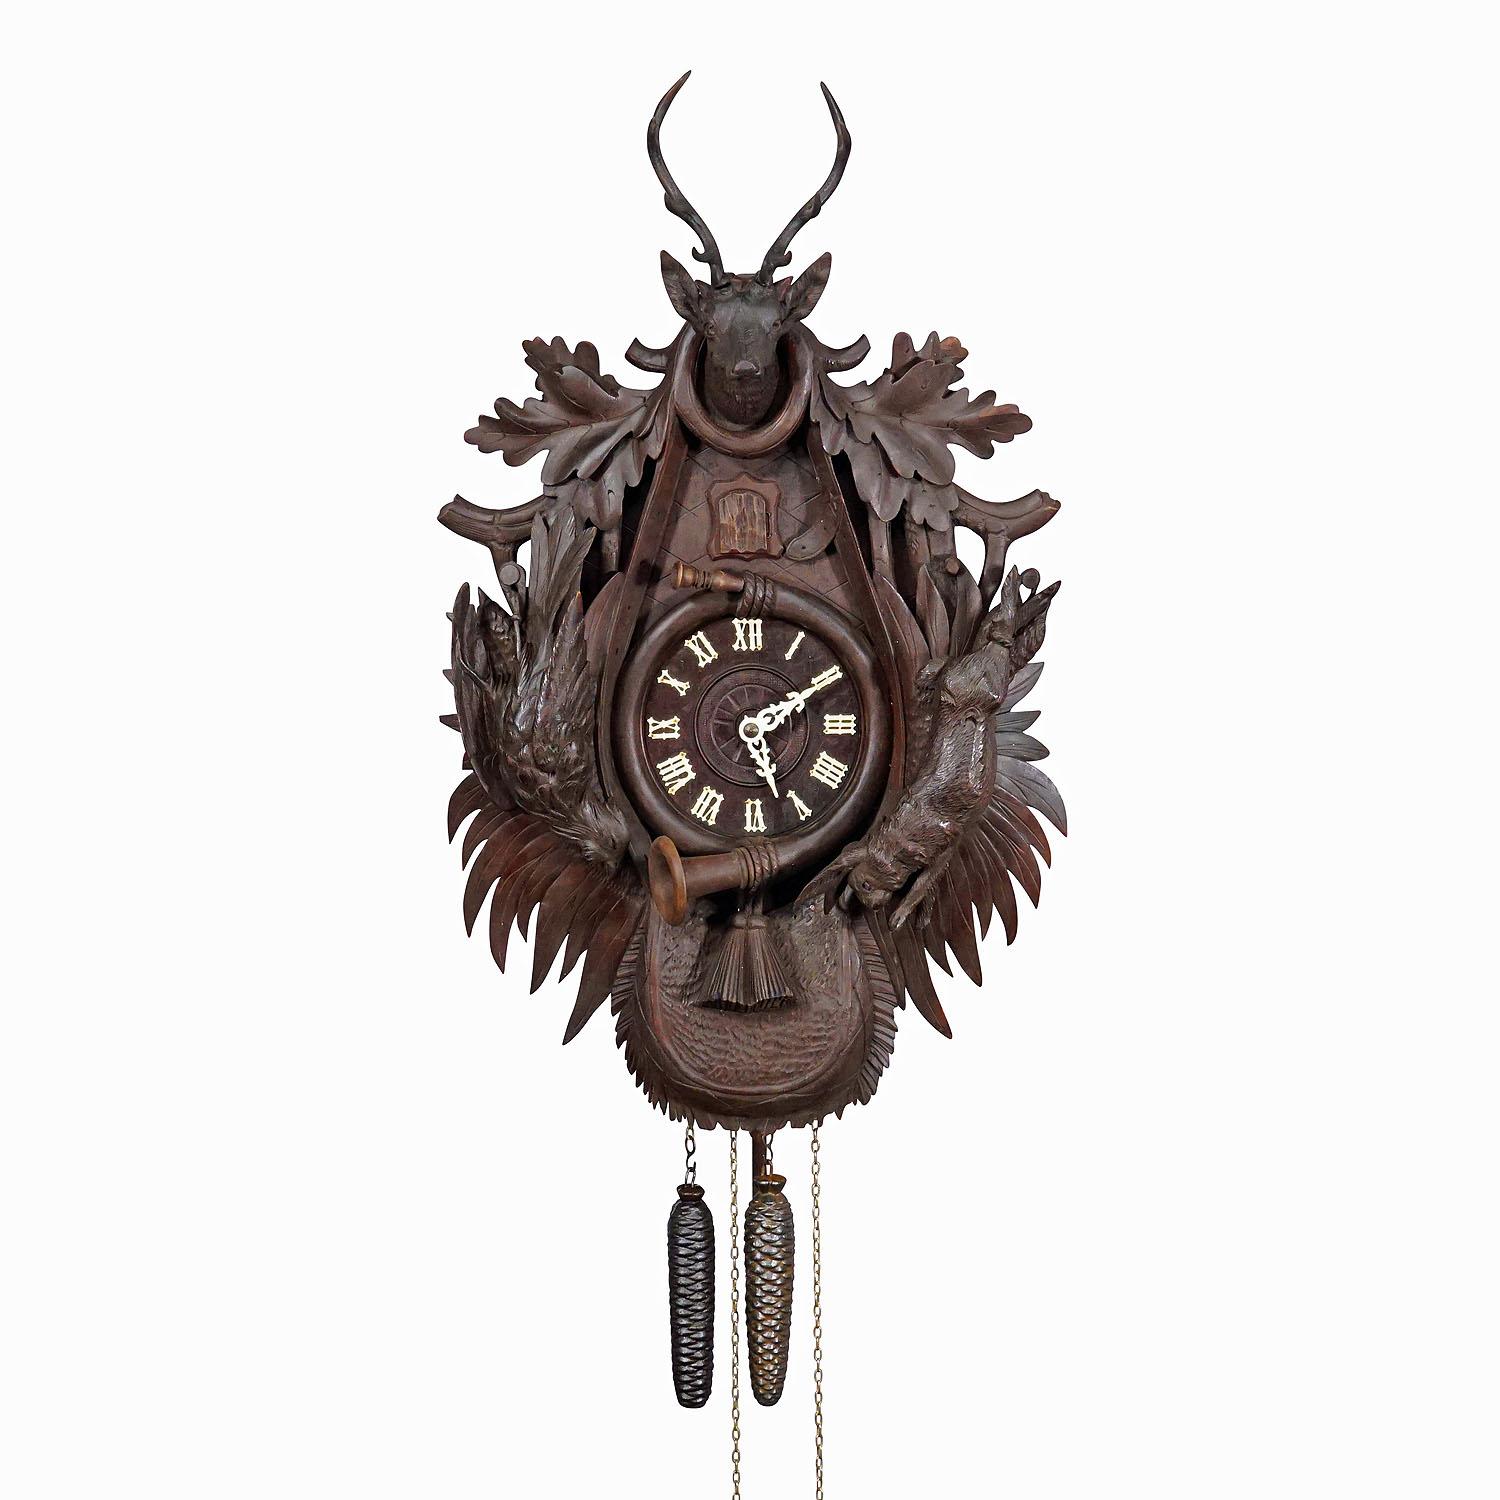 Large Antique Black Forest Carved Cuckoo Clock with Stag Head

A large handcarved wooden cuckoo clock, decorated with hunting accessoires, oak leaves, hare, pheasant and a stag head on top. Black Forest, Germany ca. 1900. Clockwork in working